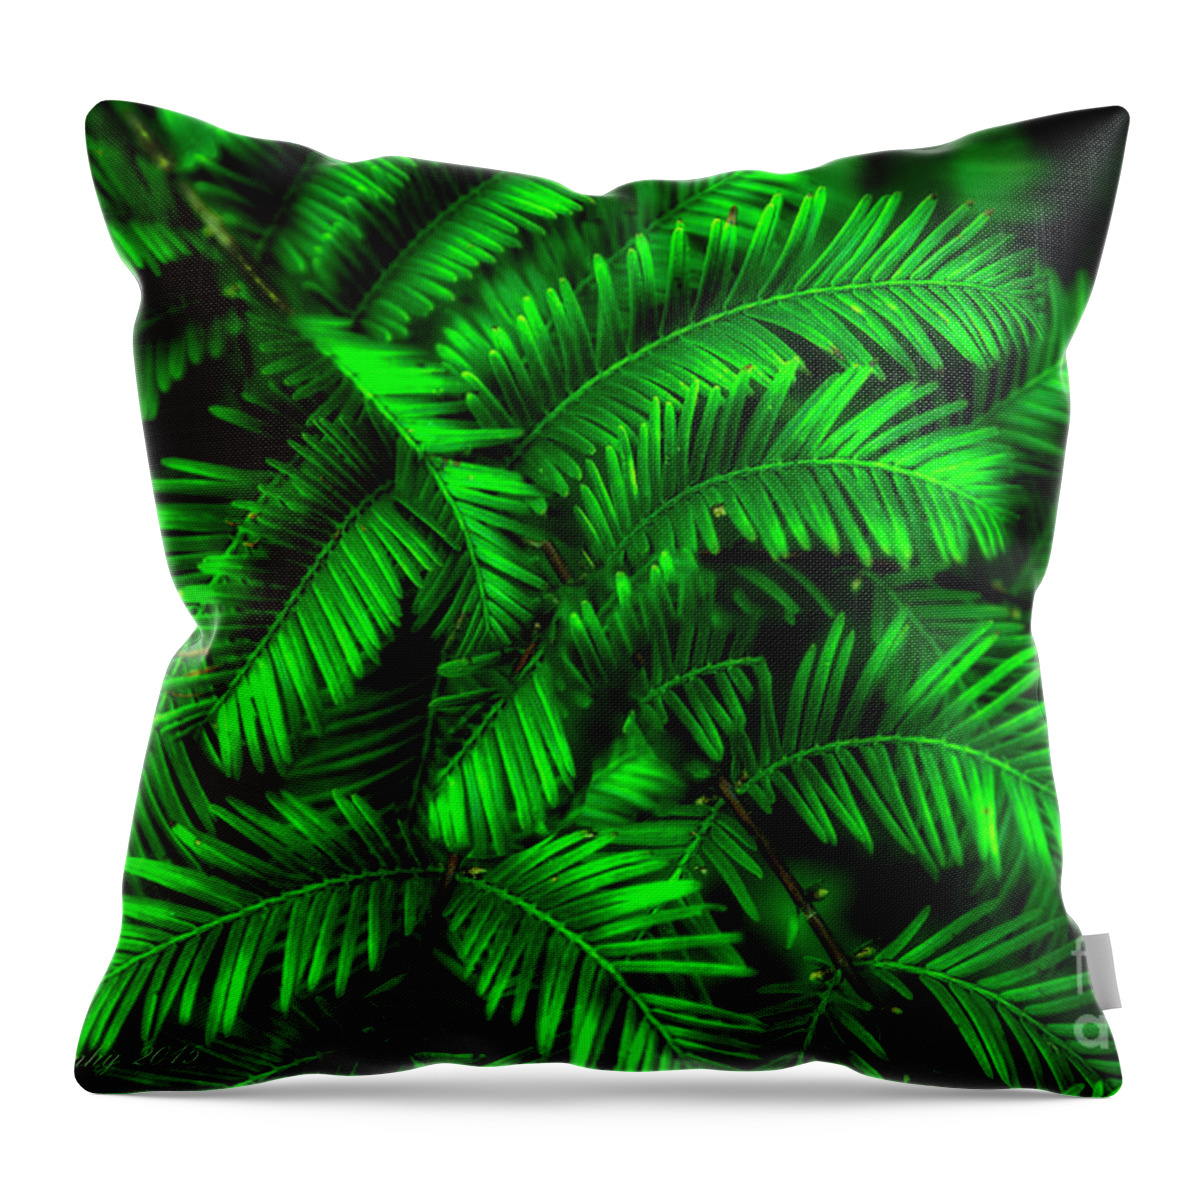 Leaves Throw Pillow featuring the photograph Green Leaves by Linda Blair